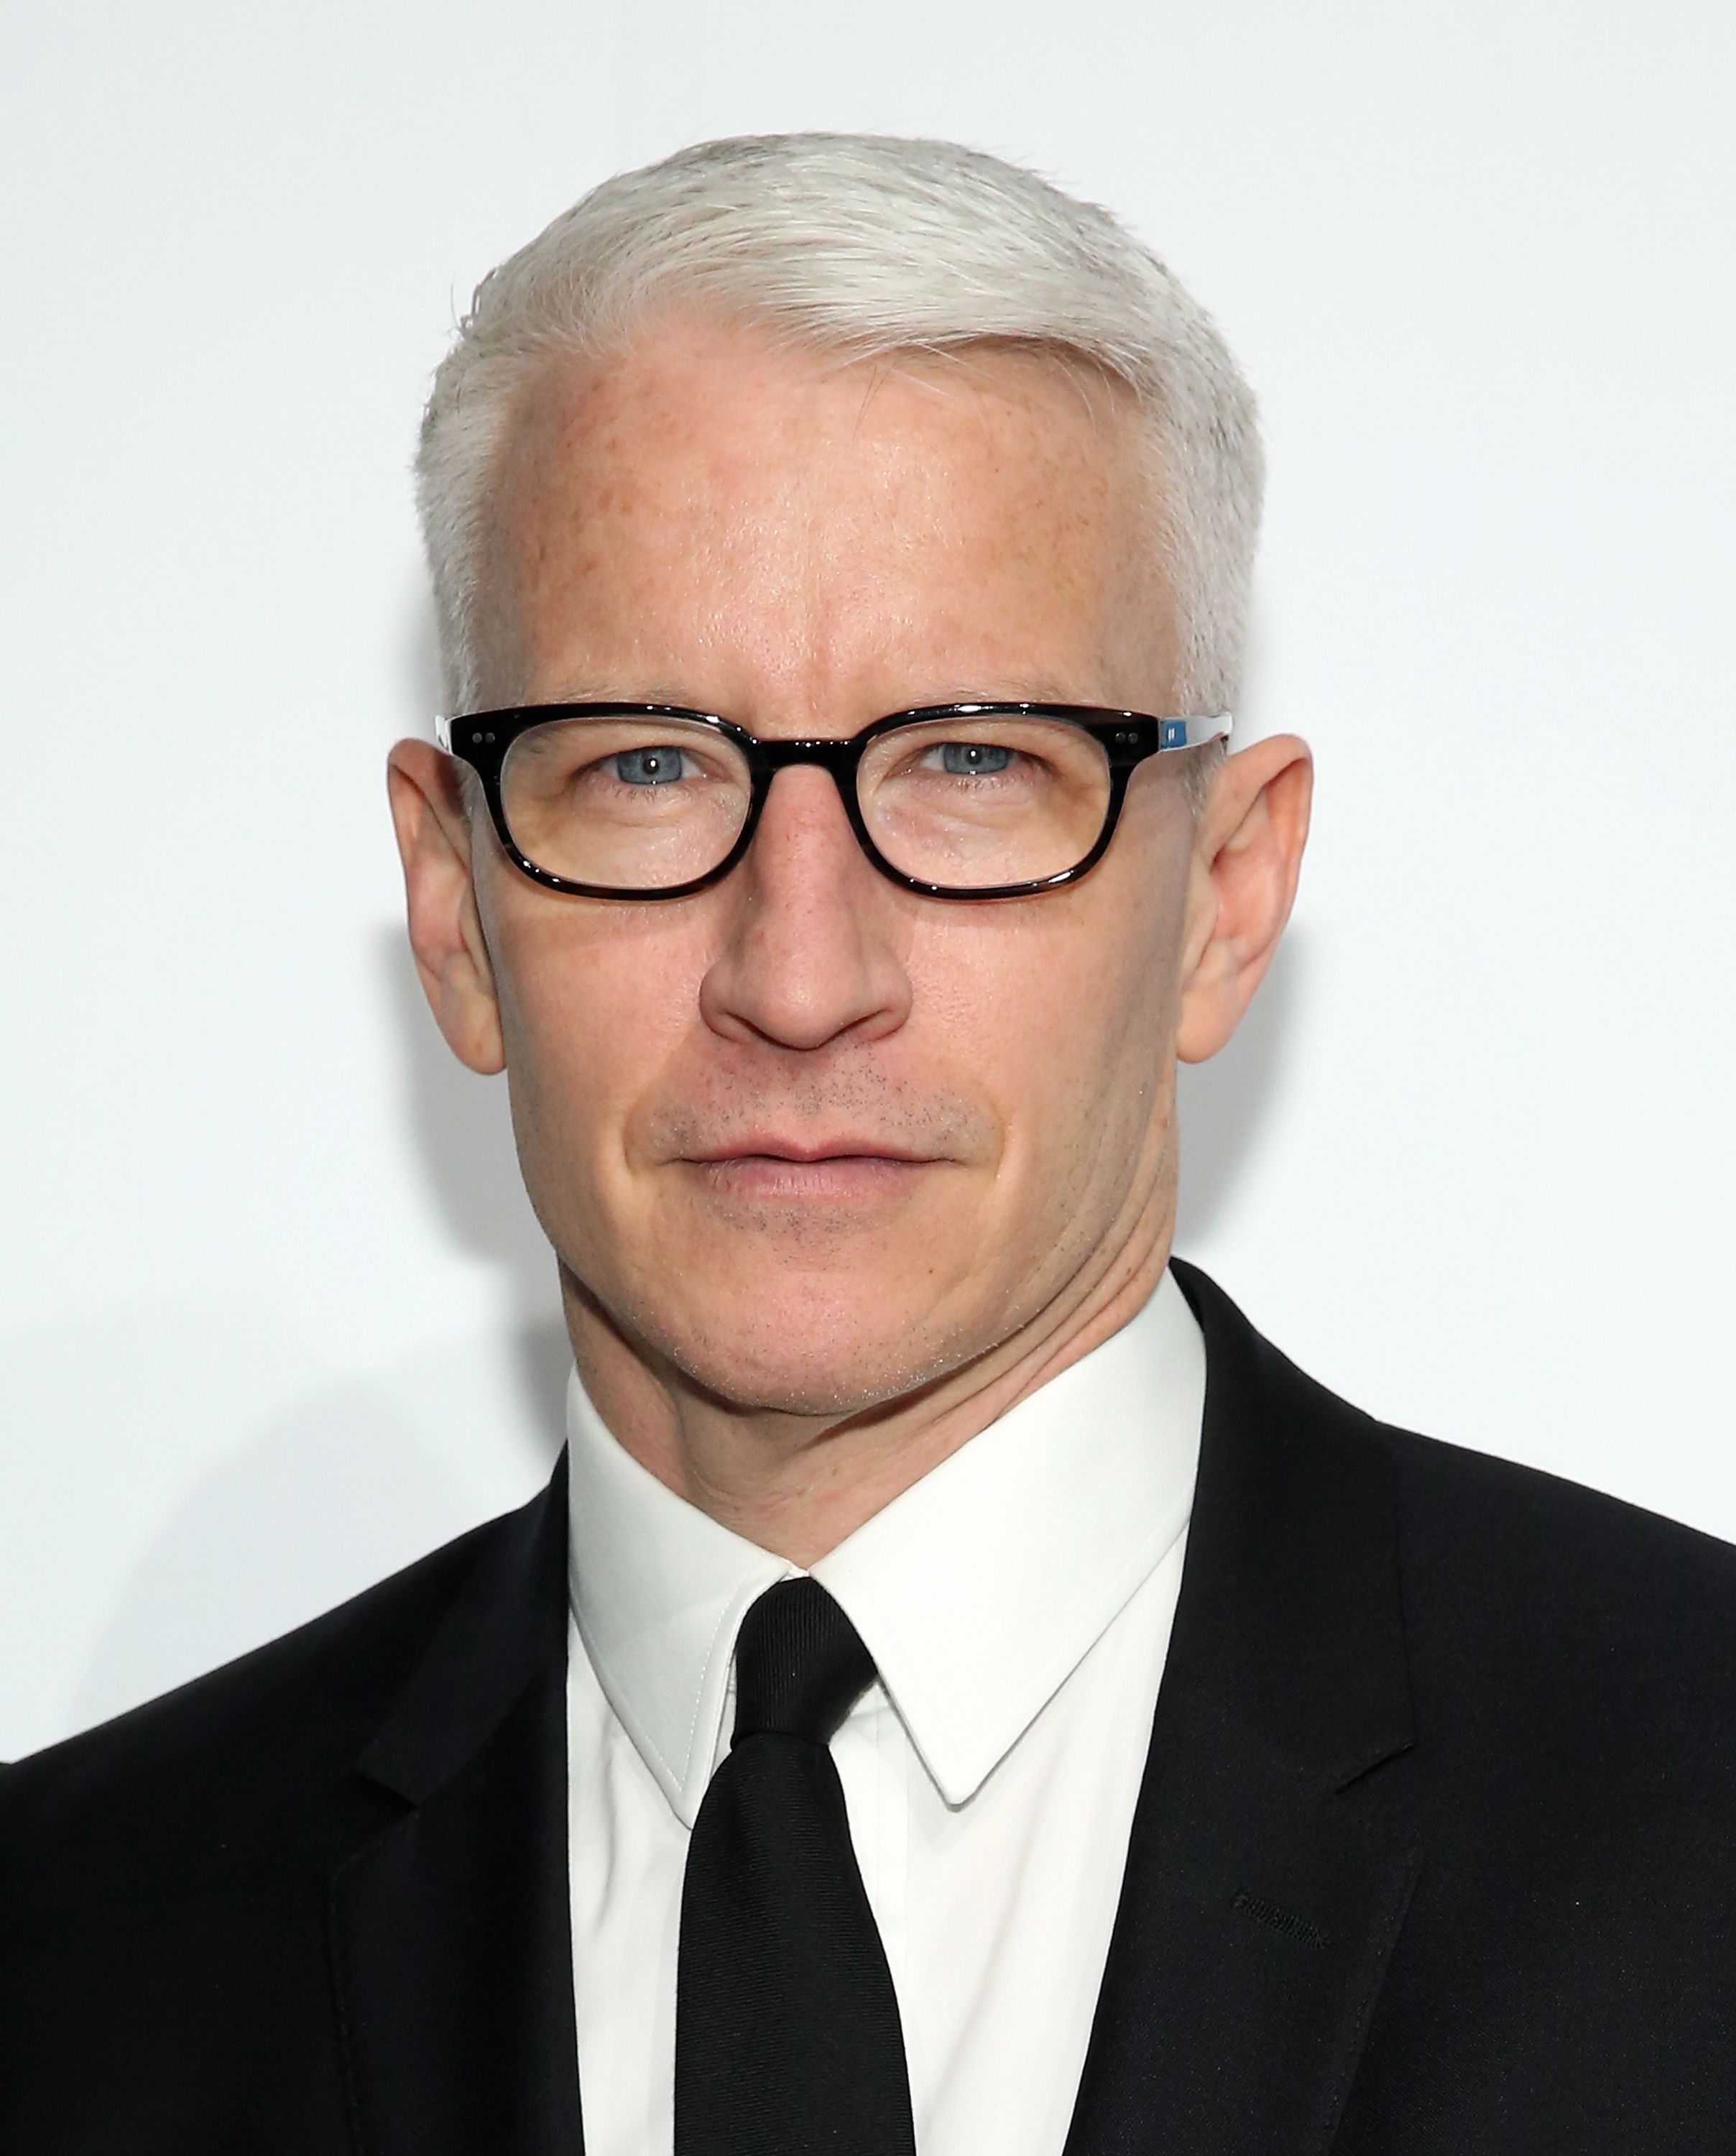 Anderson Cooper has a 2-book deal, first expected in 2022